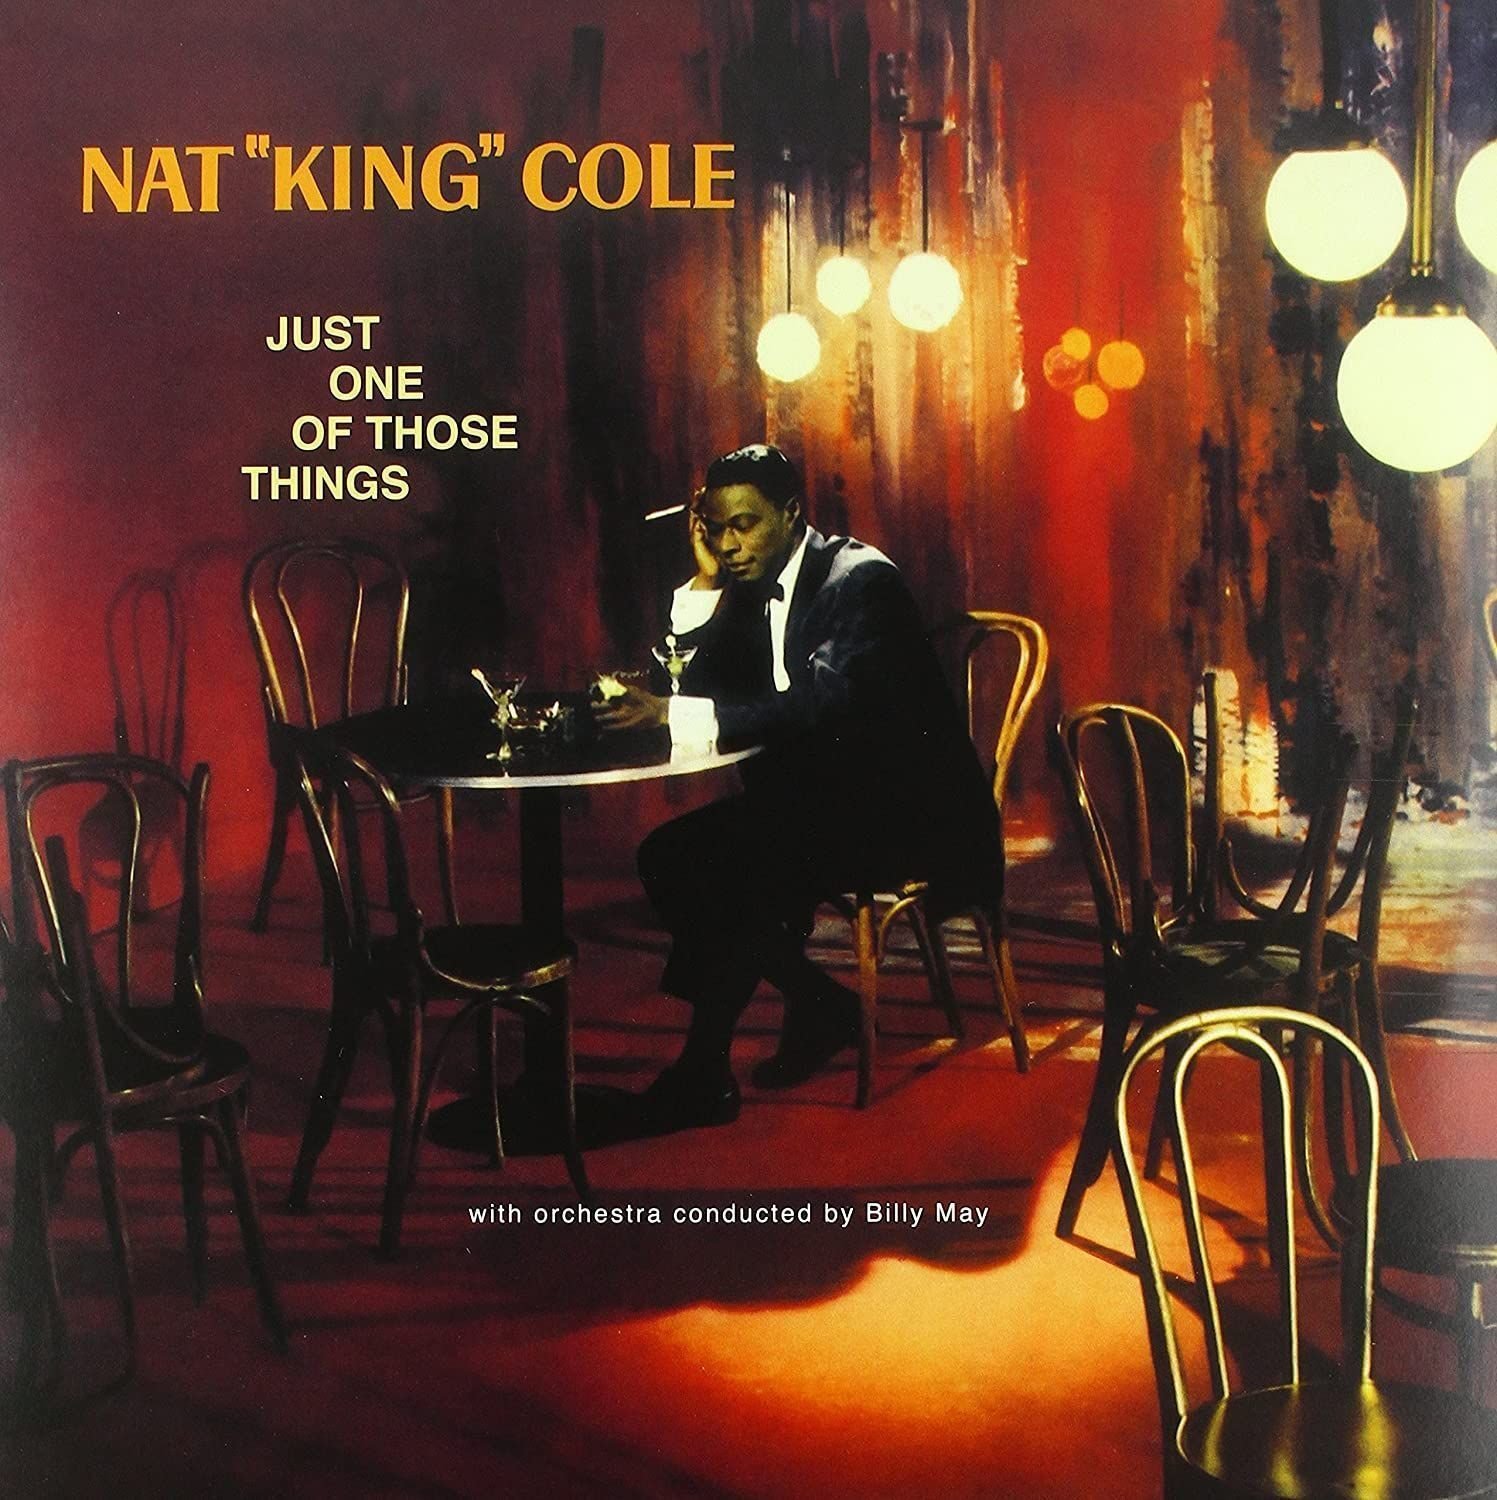 Disco de vinil Nat King Cole - Just One of Those Things (2 LP)